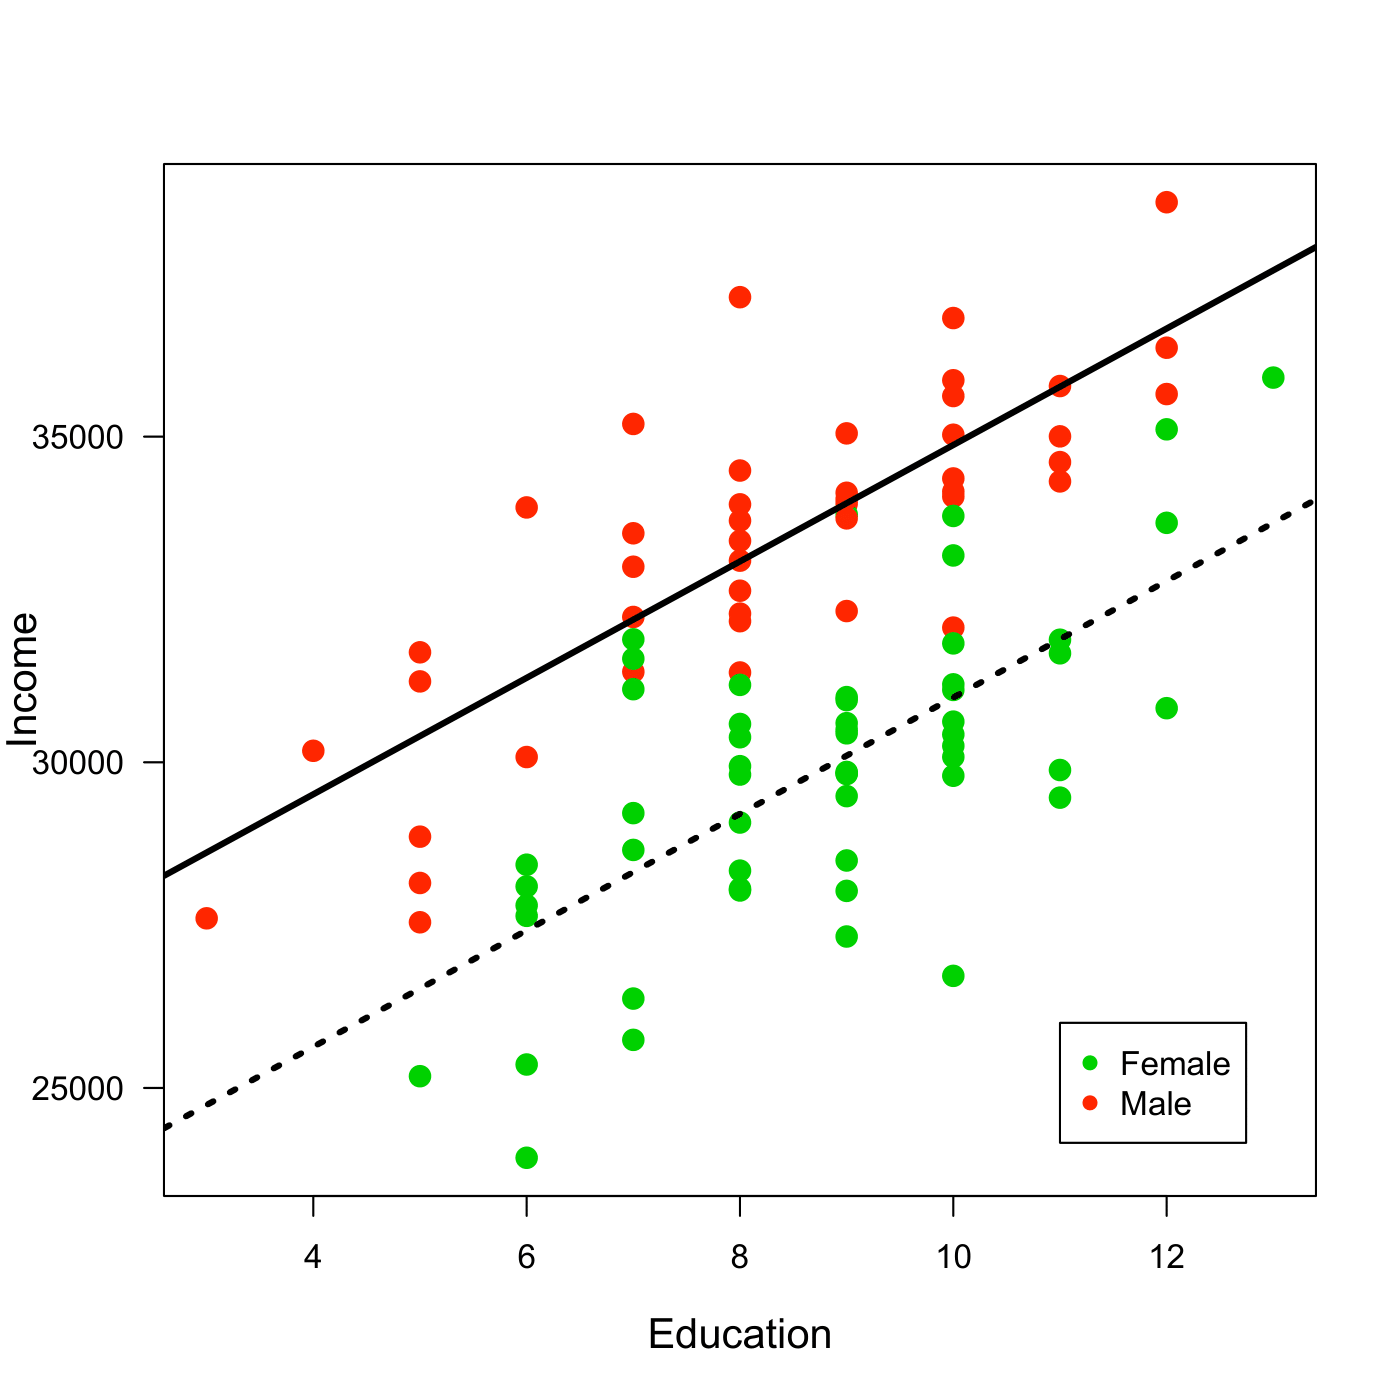 Regression through the data for Income, Education and Gender. Note: Artifical Data.